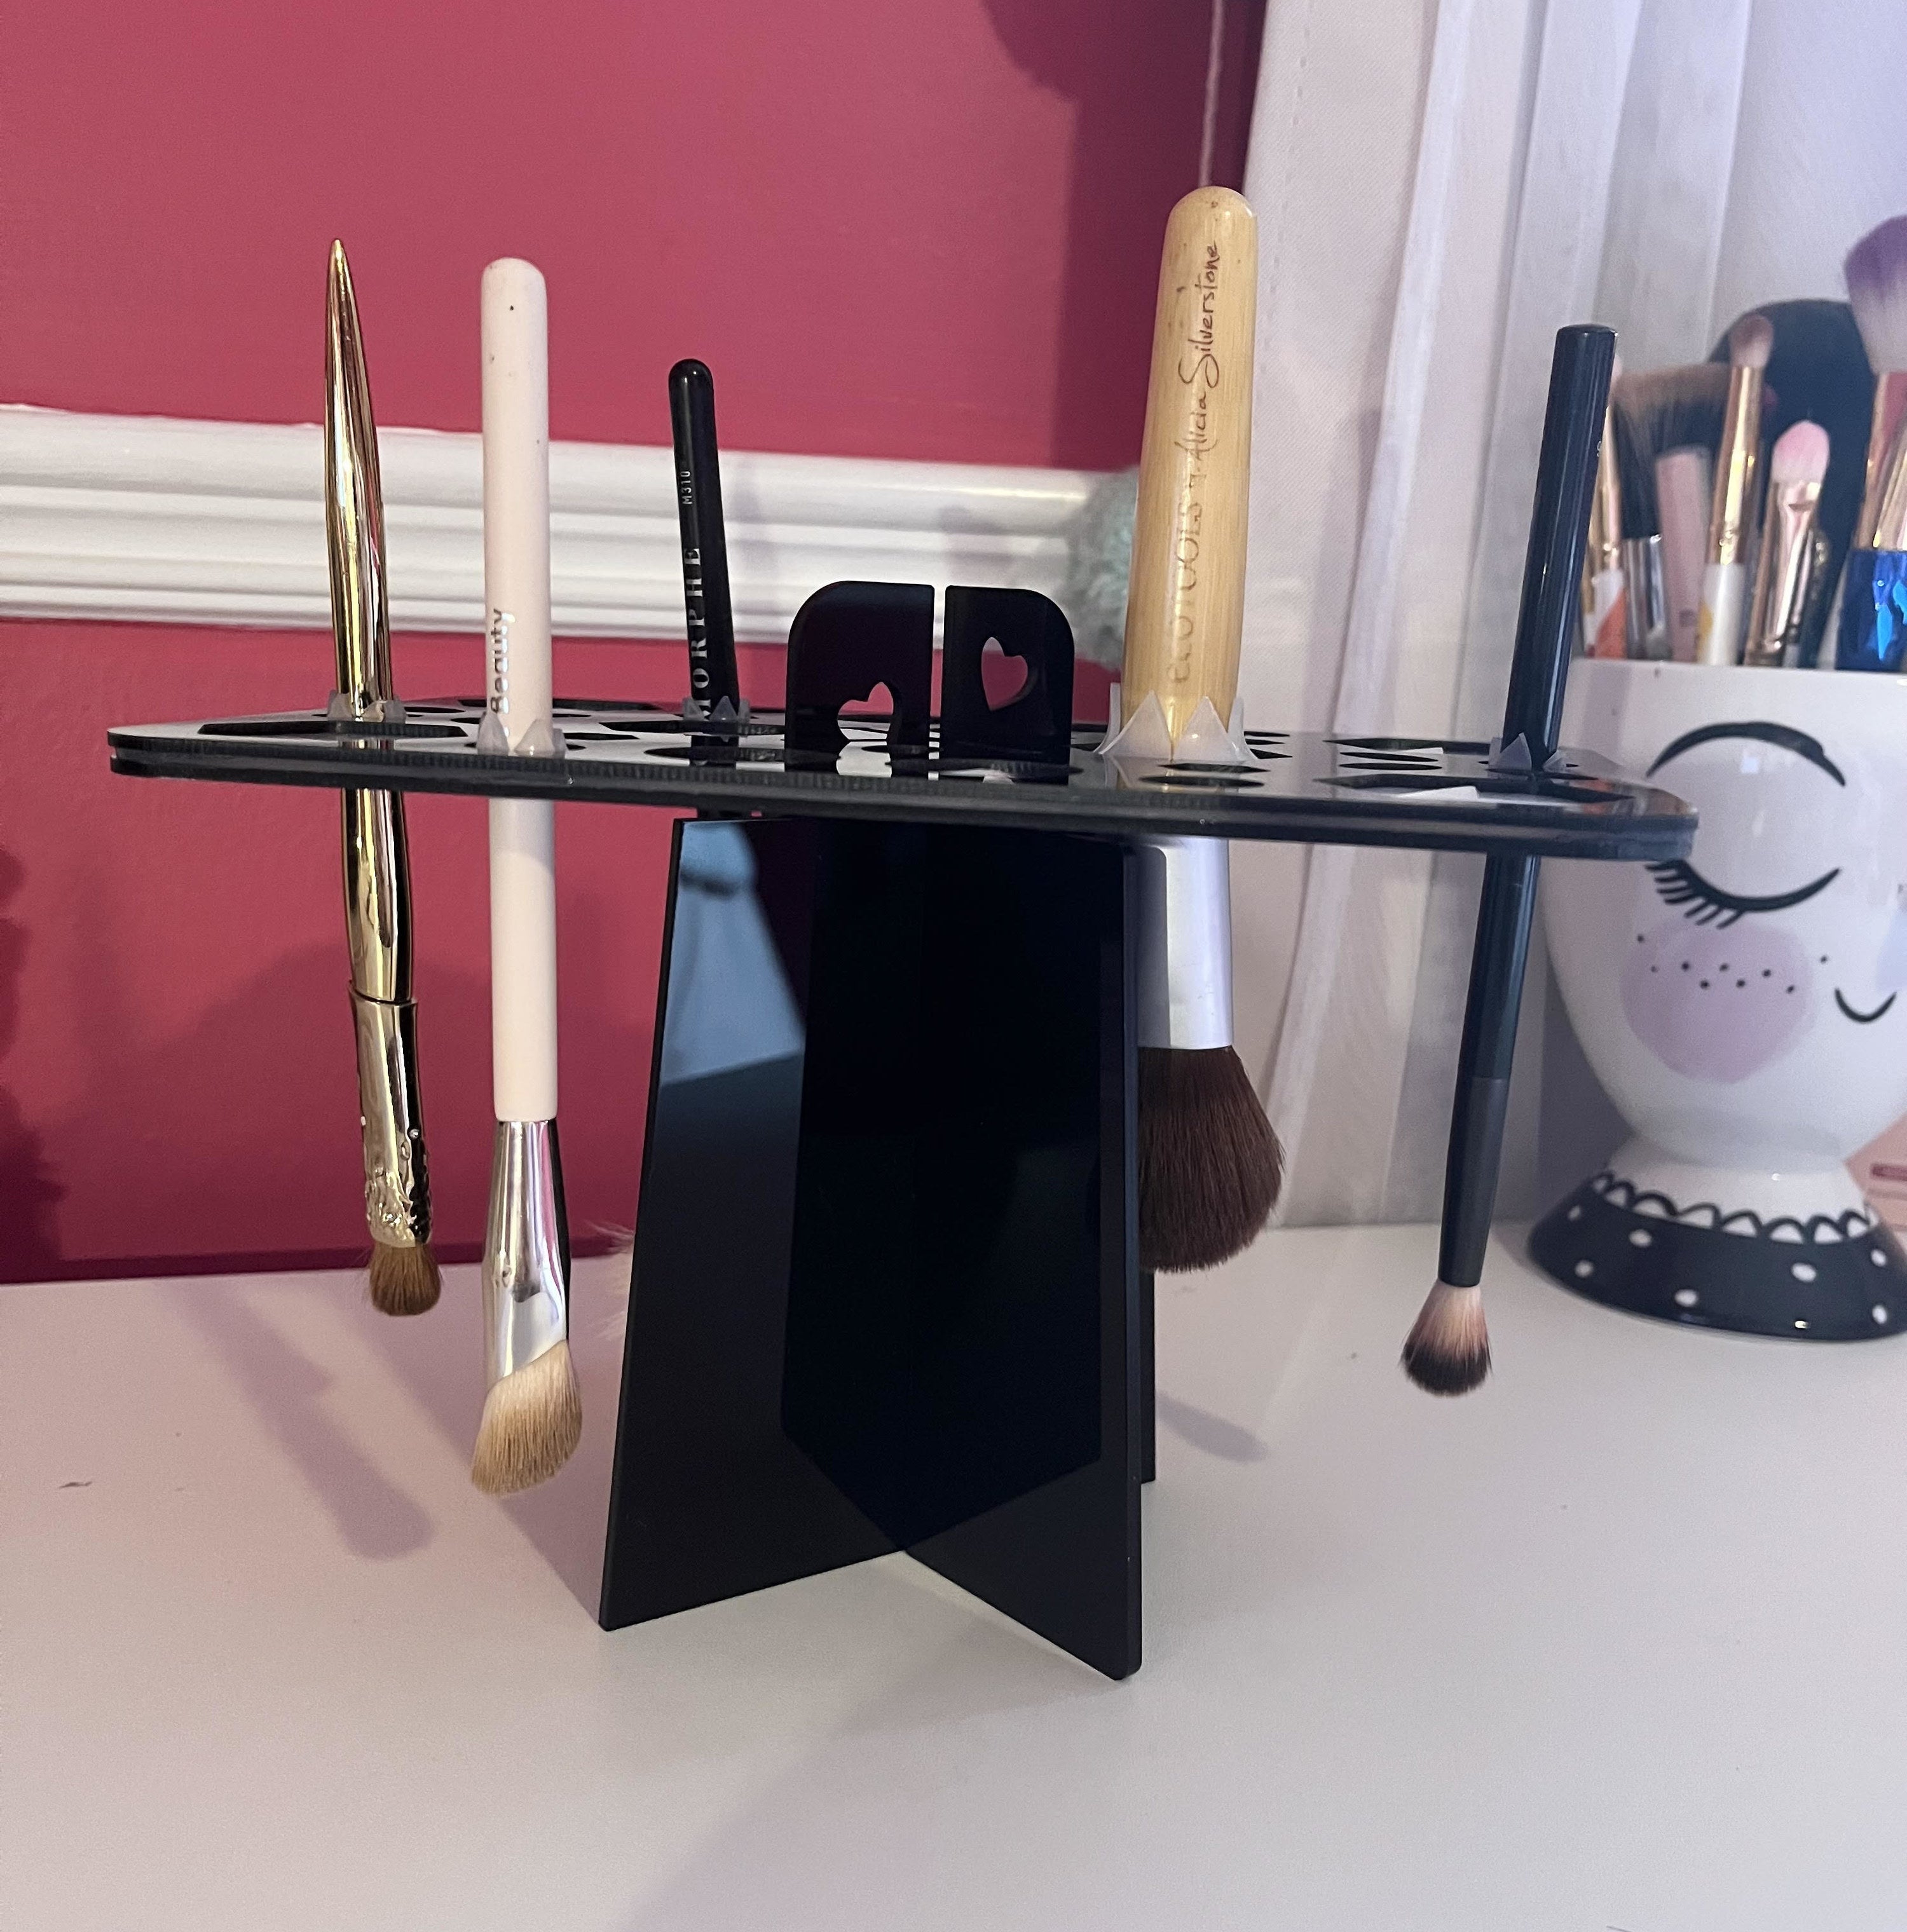 Brushes hanging in the brush holder on a table beside a cup of makeup brushes